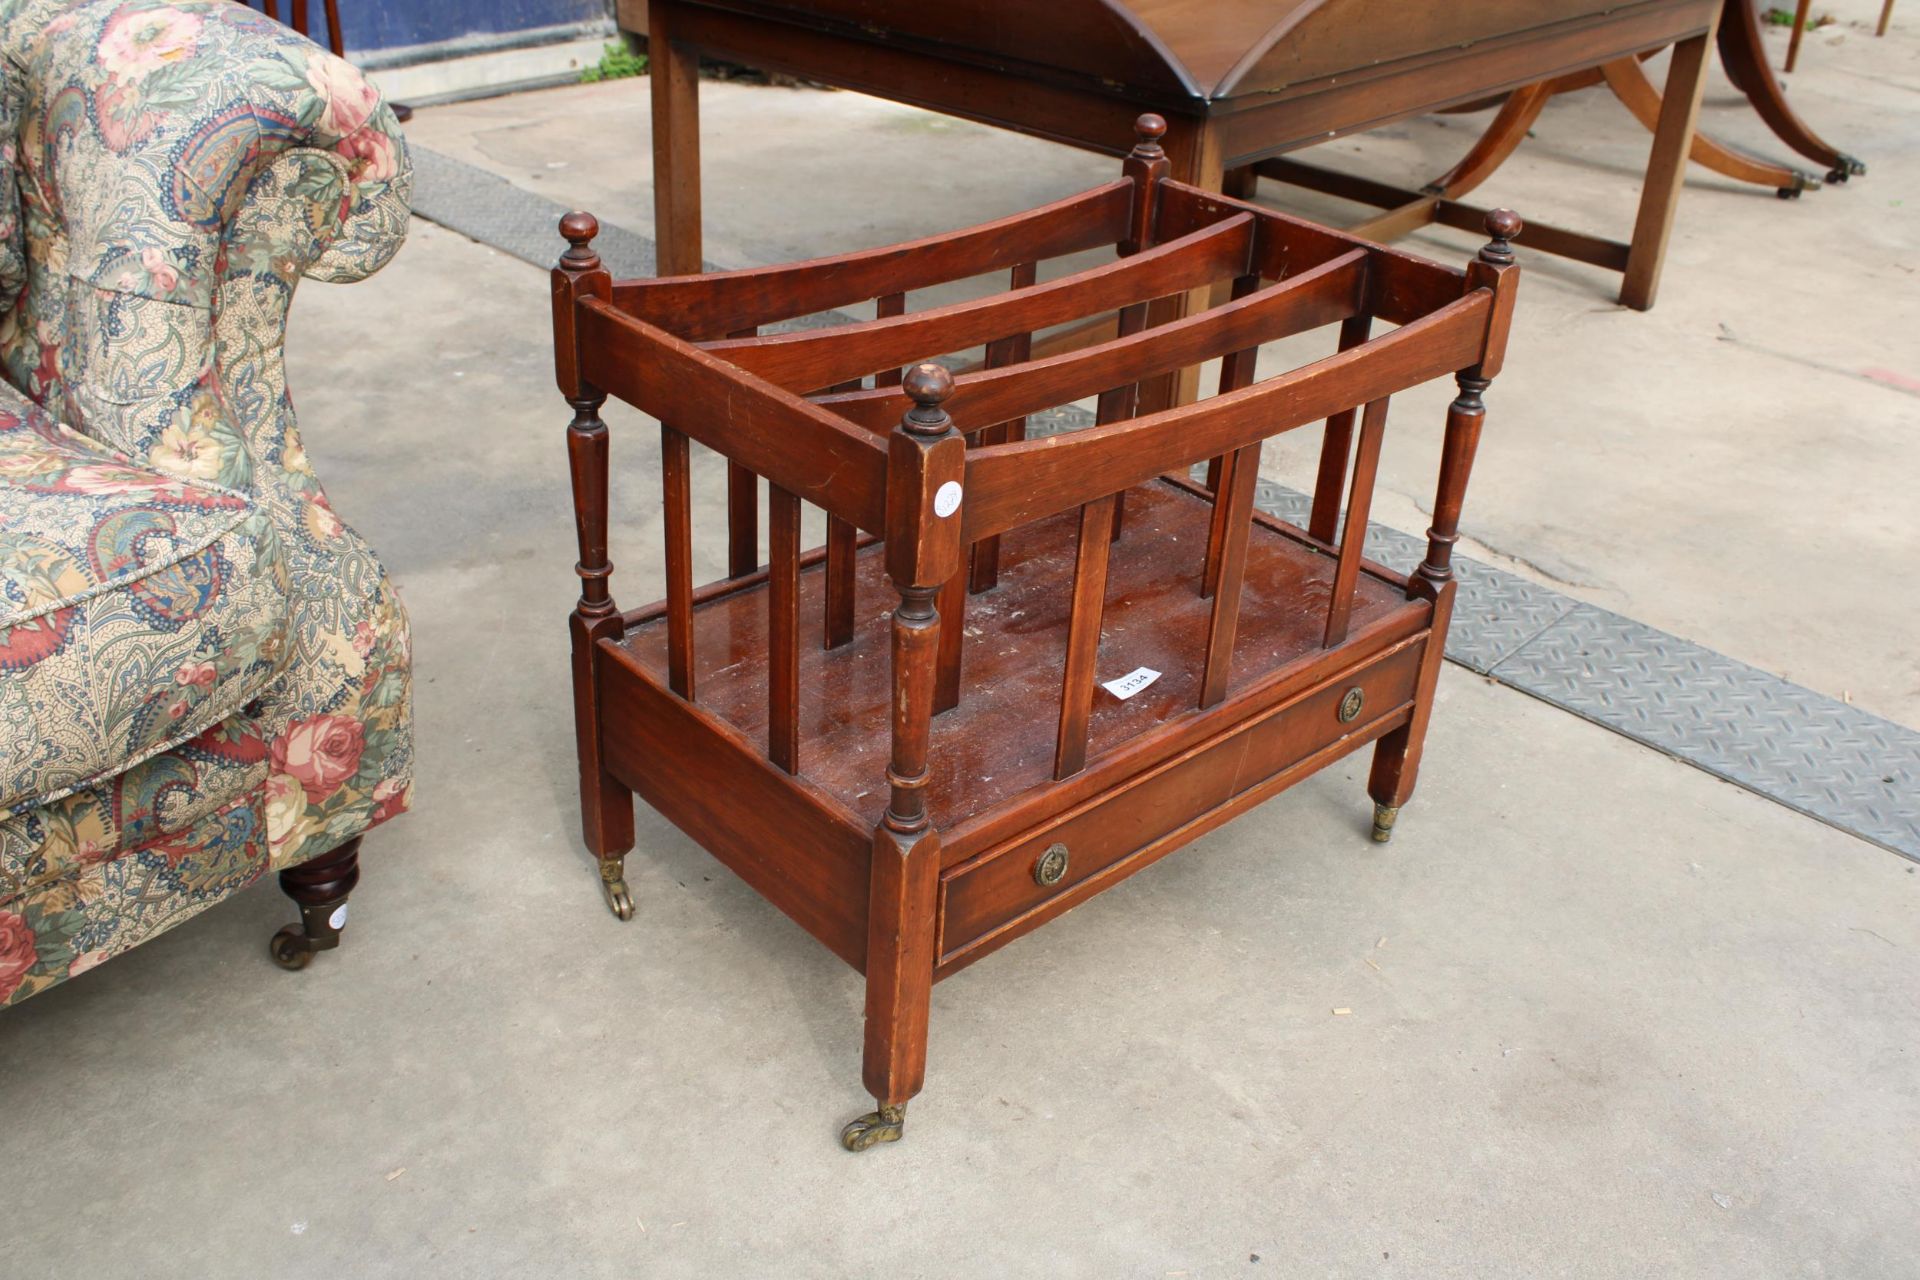 A 19TH CENTURY STYLE MAHOGANY THREE TIER CANTERBURY WITH SINGLE DRAWER - Image 2 of 2